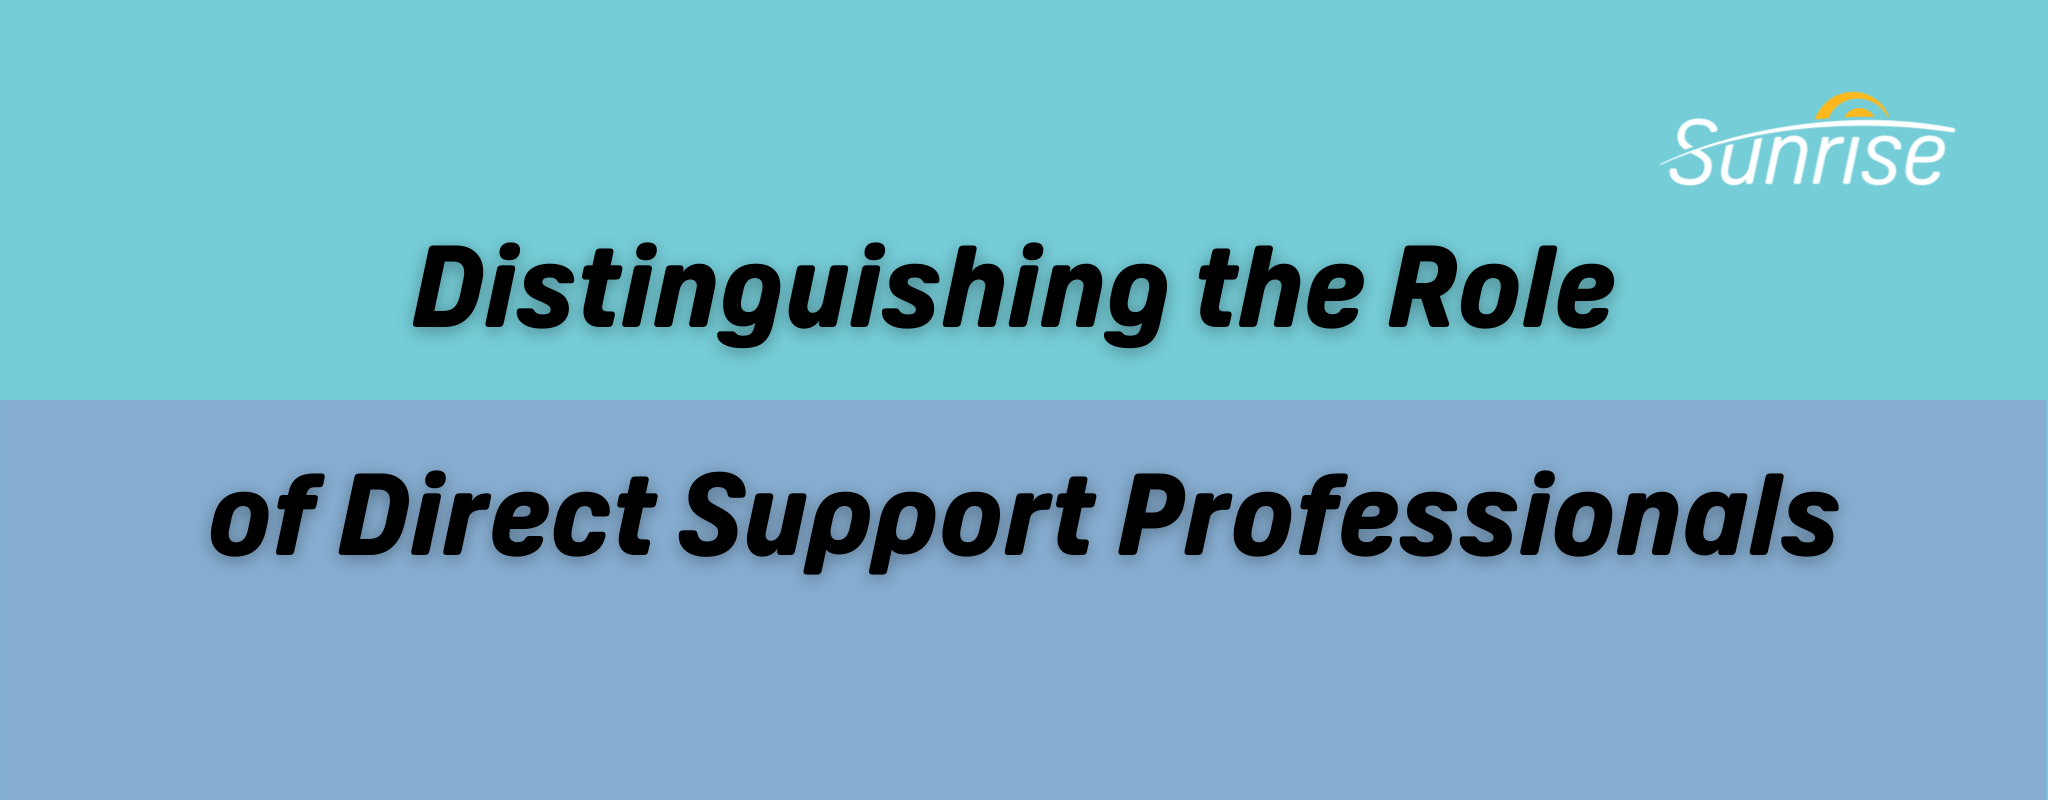 Distinguishing the Role of Direct Support Professionals